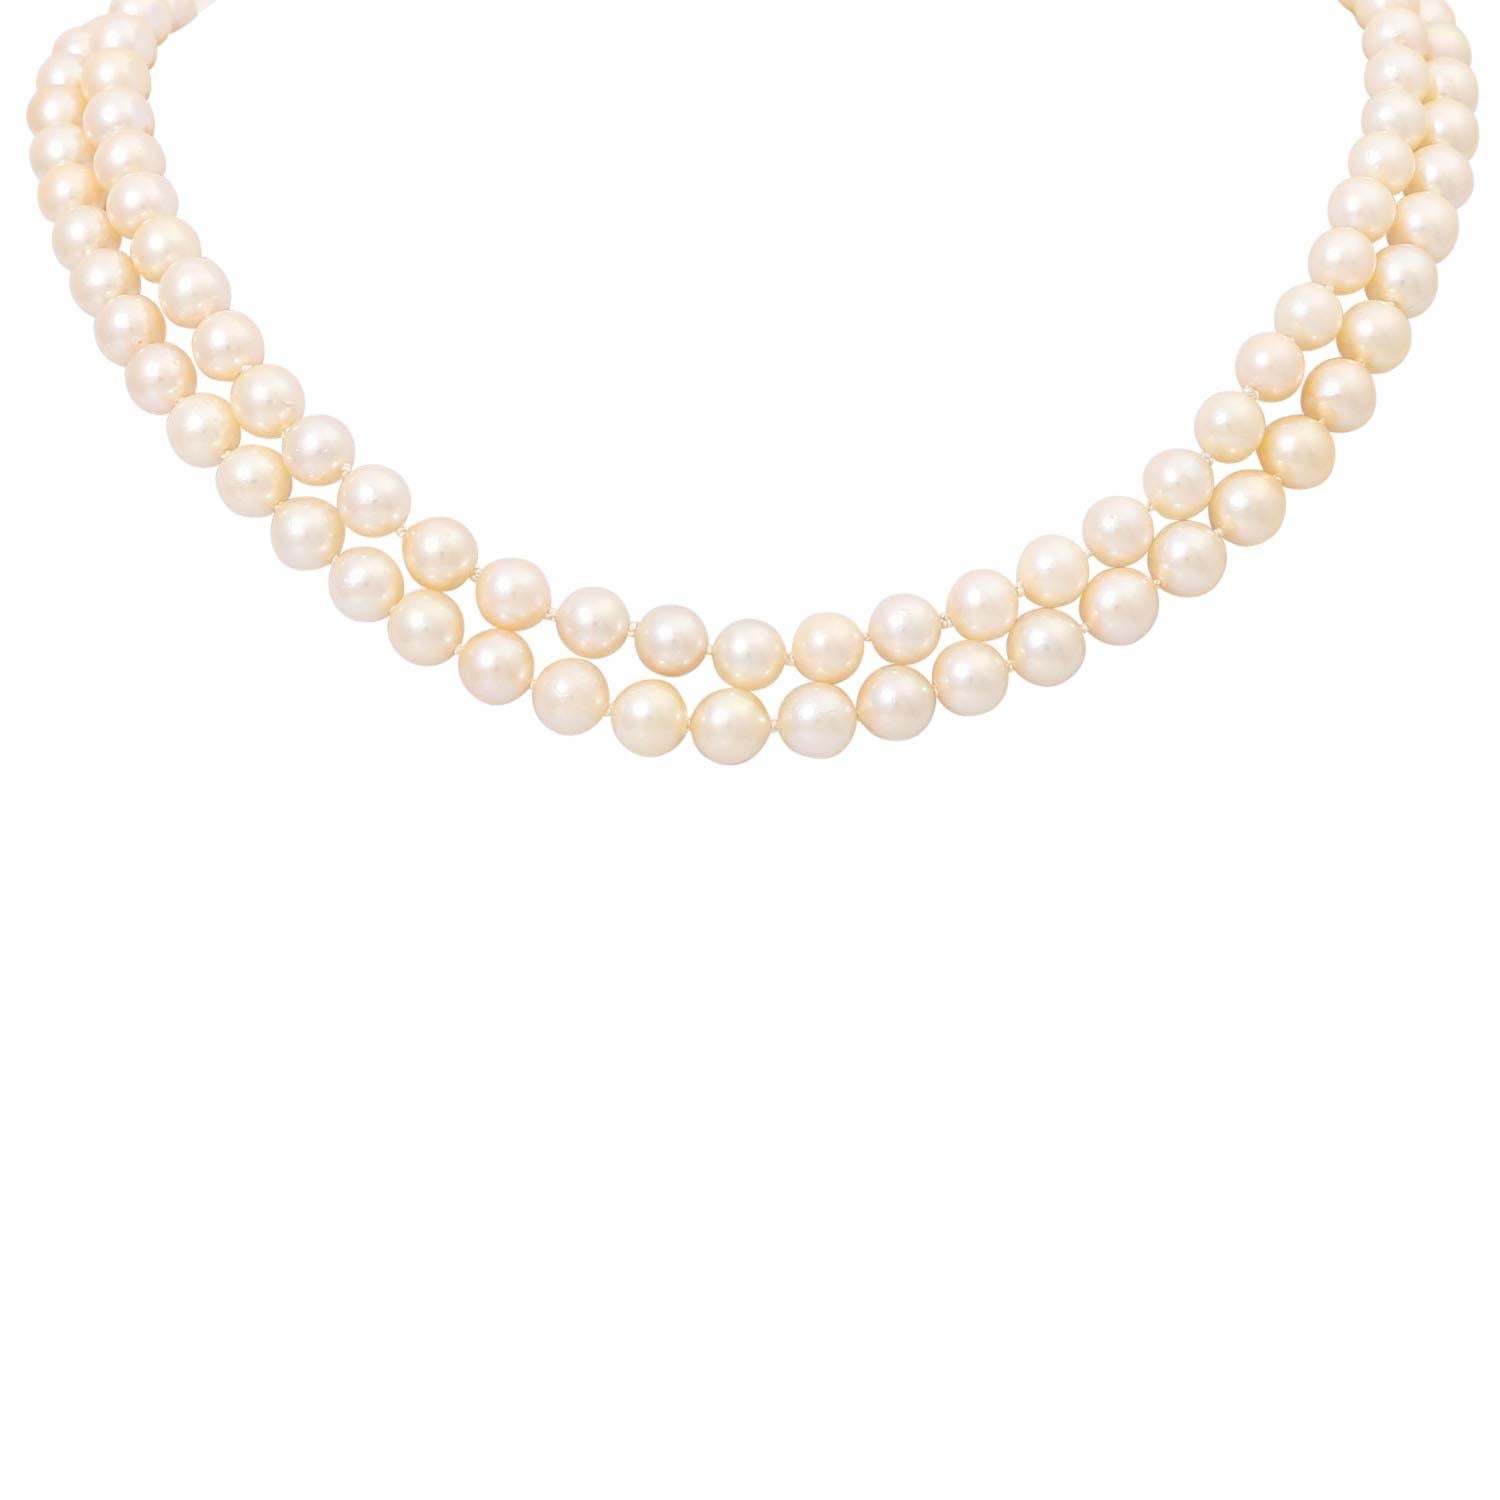 made of WG+GG 18K (24.1 g), partly set with brilliant-cut diamonds totaling approx. 0.16 ct, good color and clarity, Akoya cultured pearls approx. 6.5 mm with a good luster, chain lengths approx. 40 cm each , additional some replacement beads, 2nd